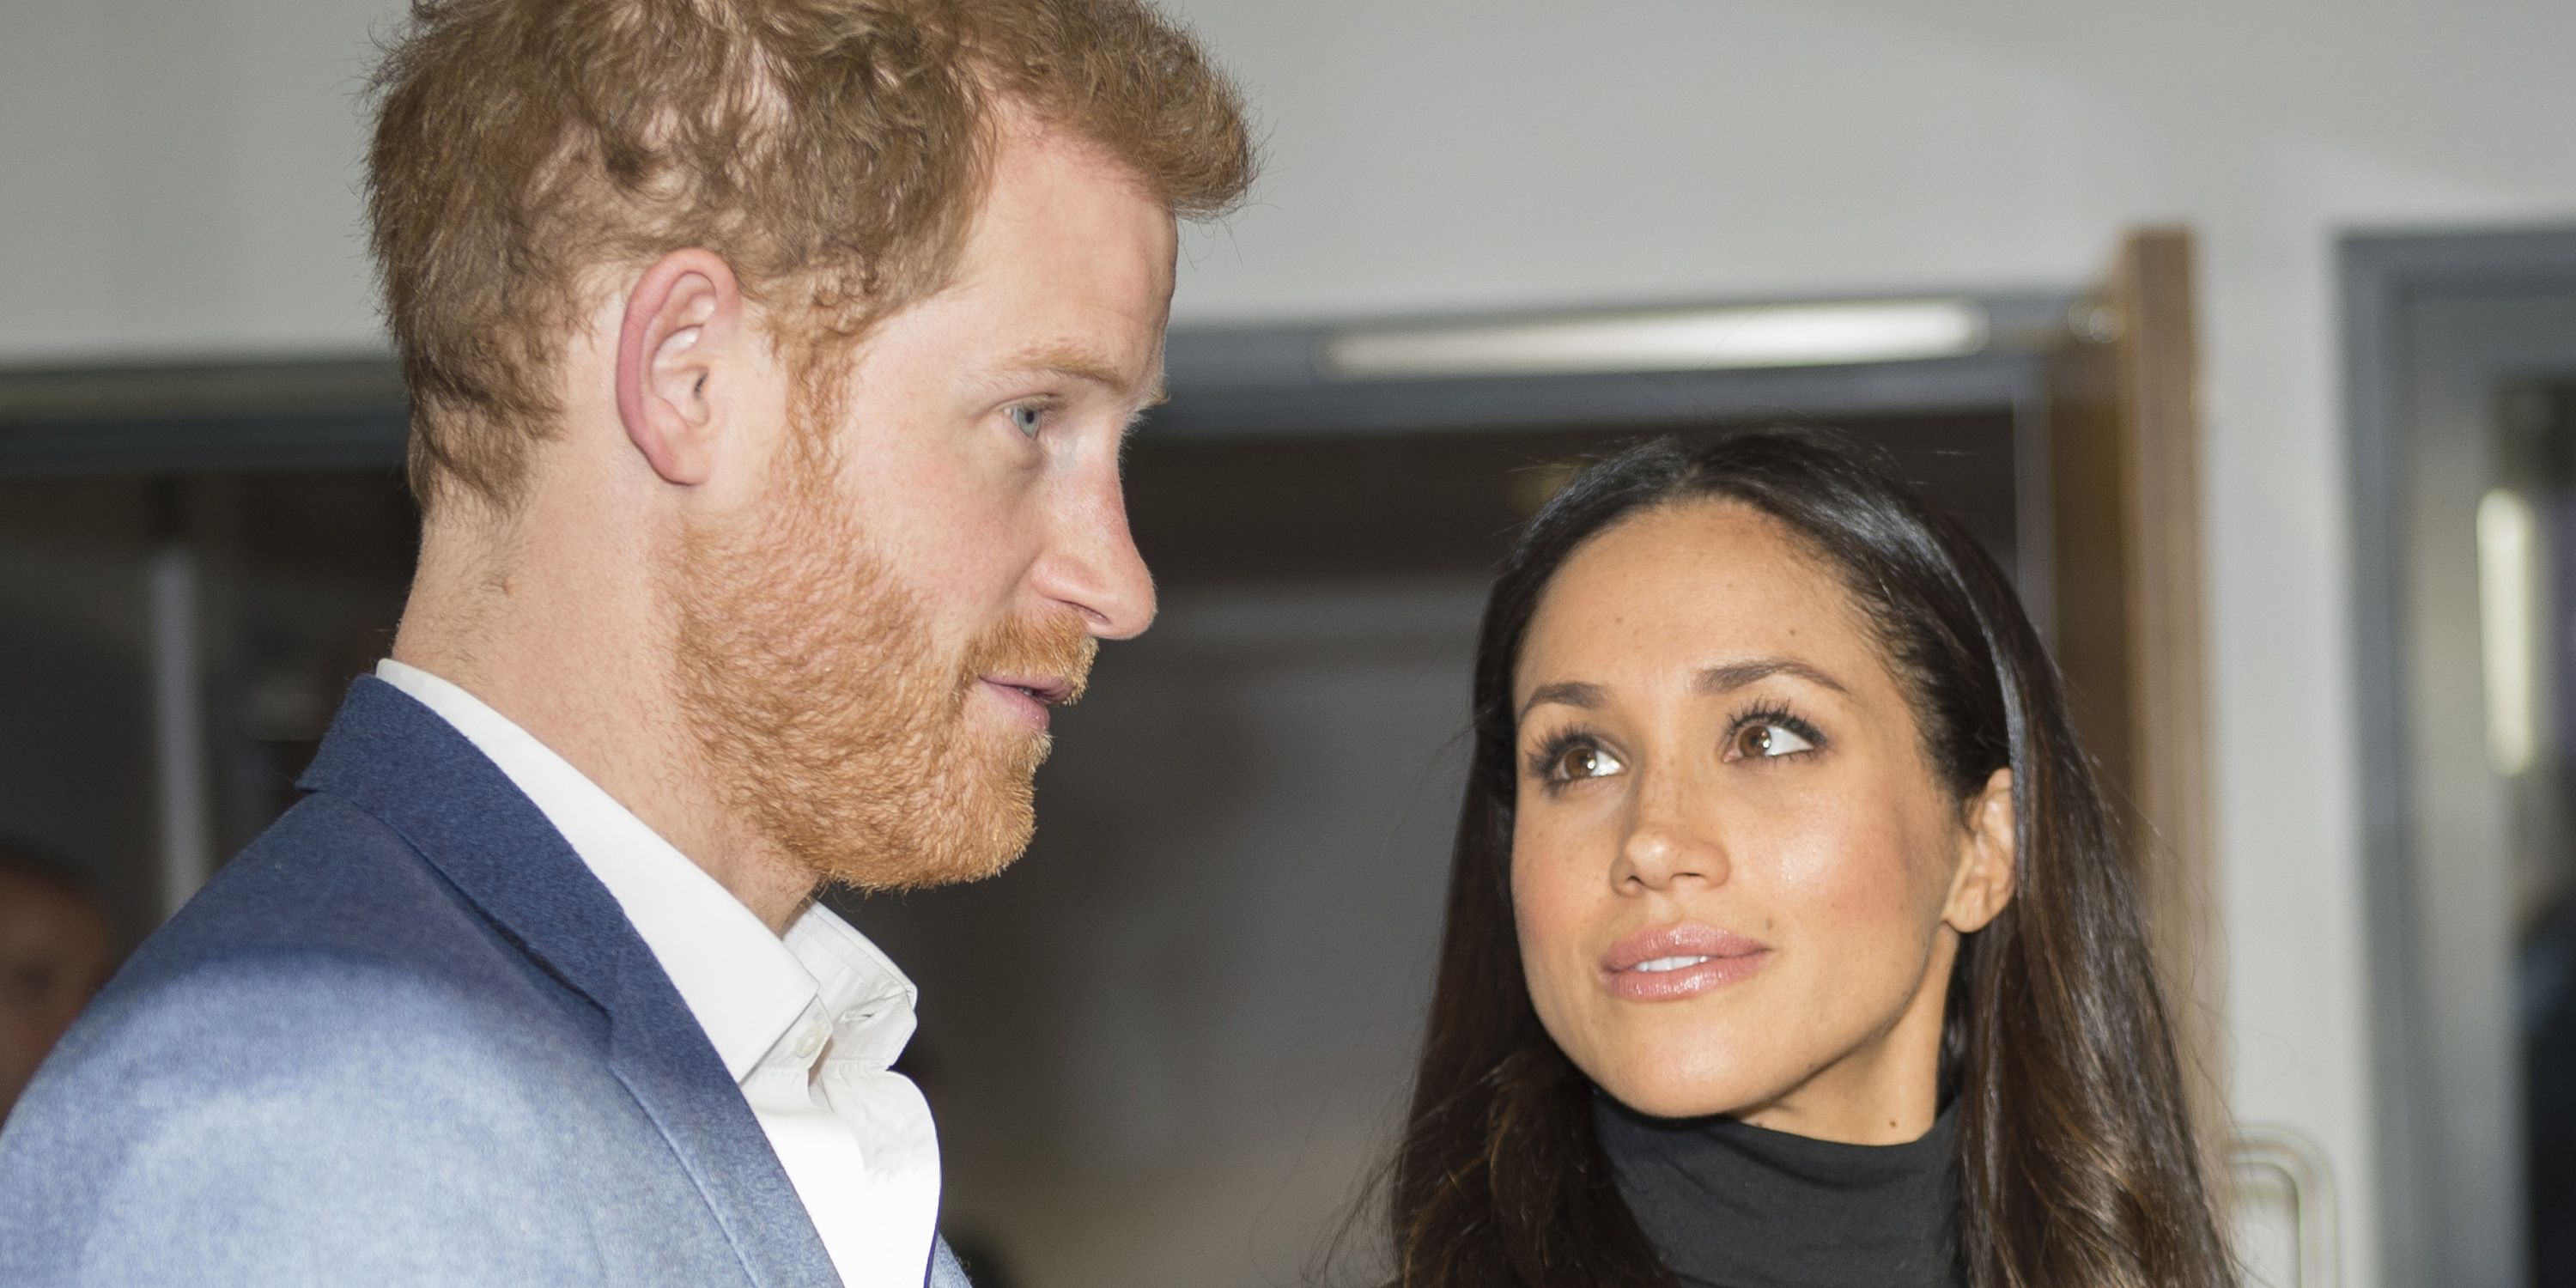 https://hips.hearstapps.com/hmg-prod.s3.amazonaws.com/images/hbz-prince-harry-meghan-markle-cute-moments-gettyimages-883619300-1523378904.jpg?crop=1xw:1xh;center,top